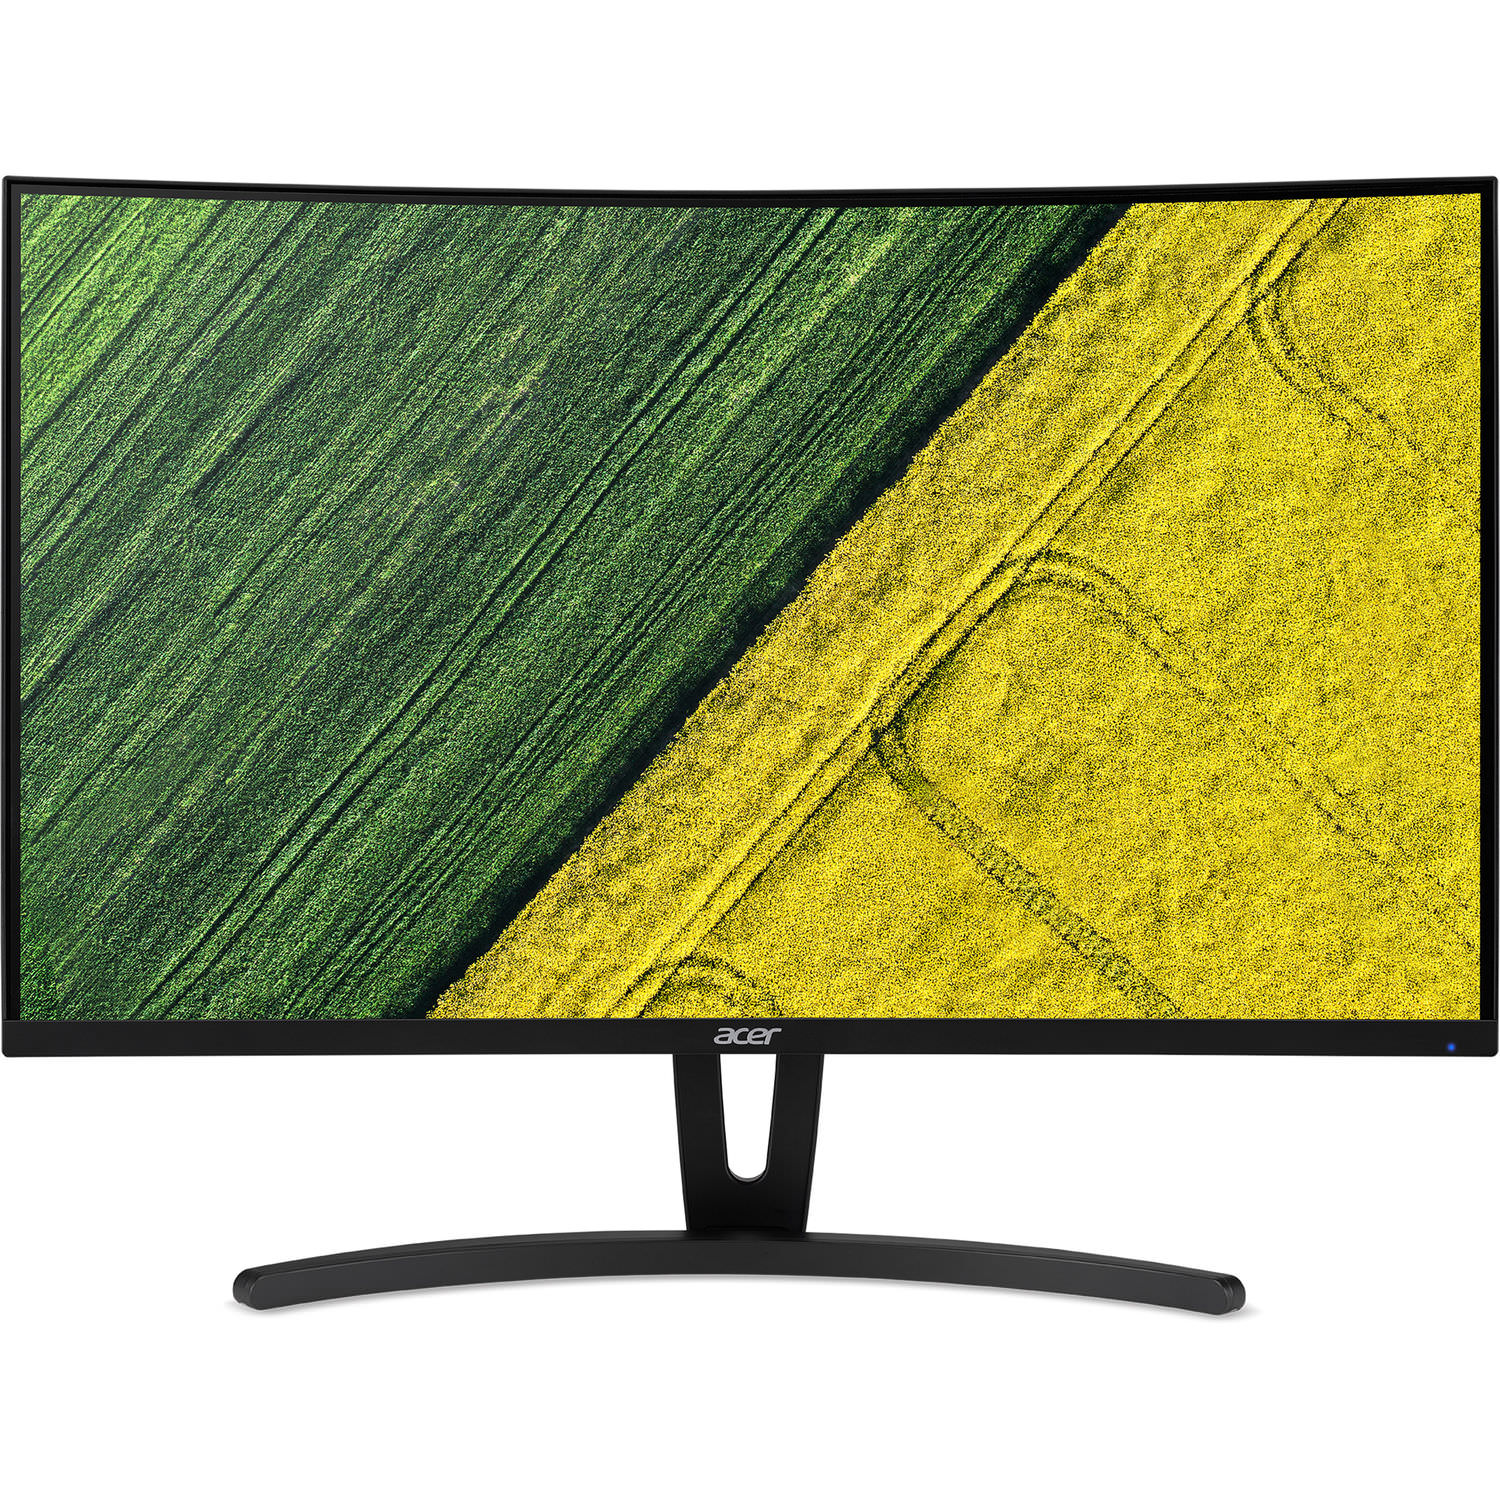 Acer ED273 Abidpx 27" Curved LCD Monitor - image 1 of 5